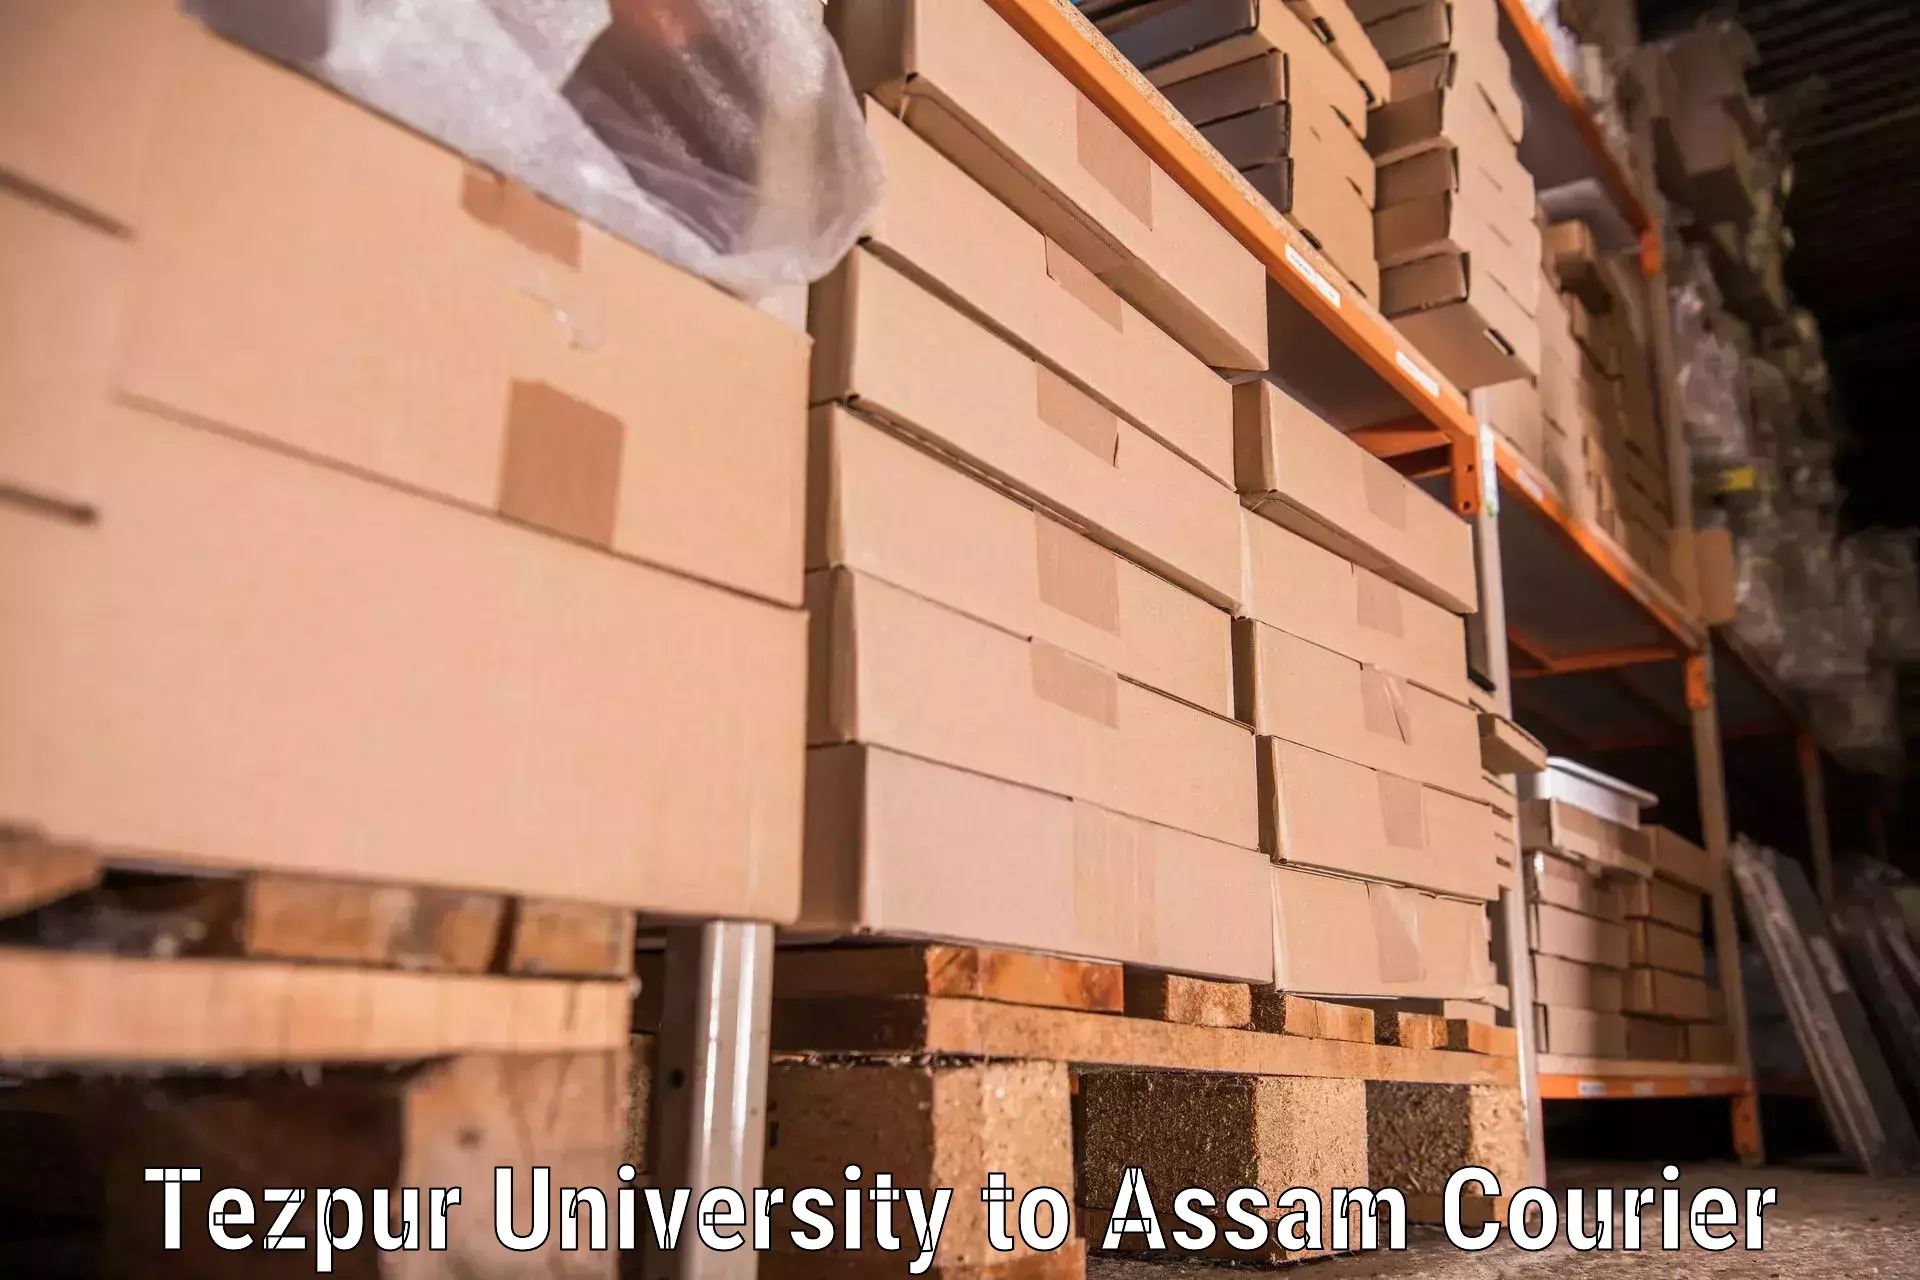 High-quality moving services Tezpur University to Sonitpur